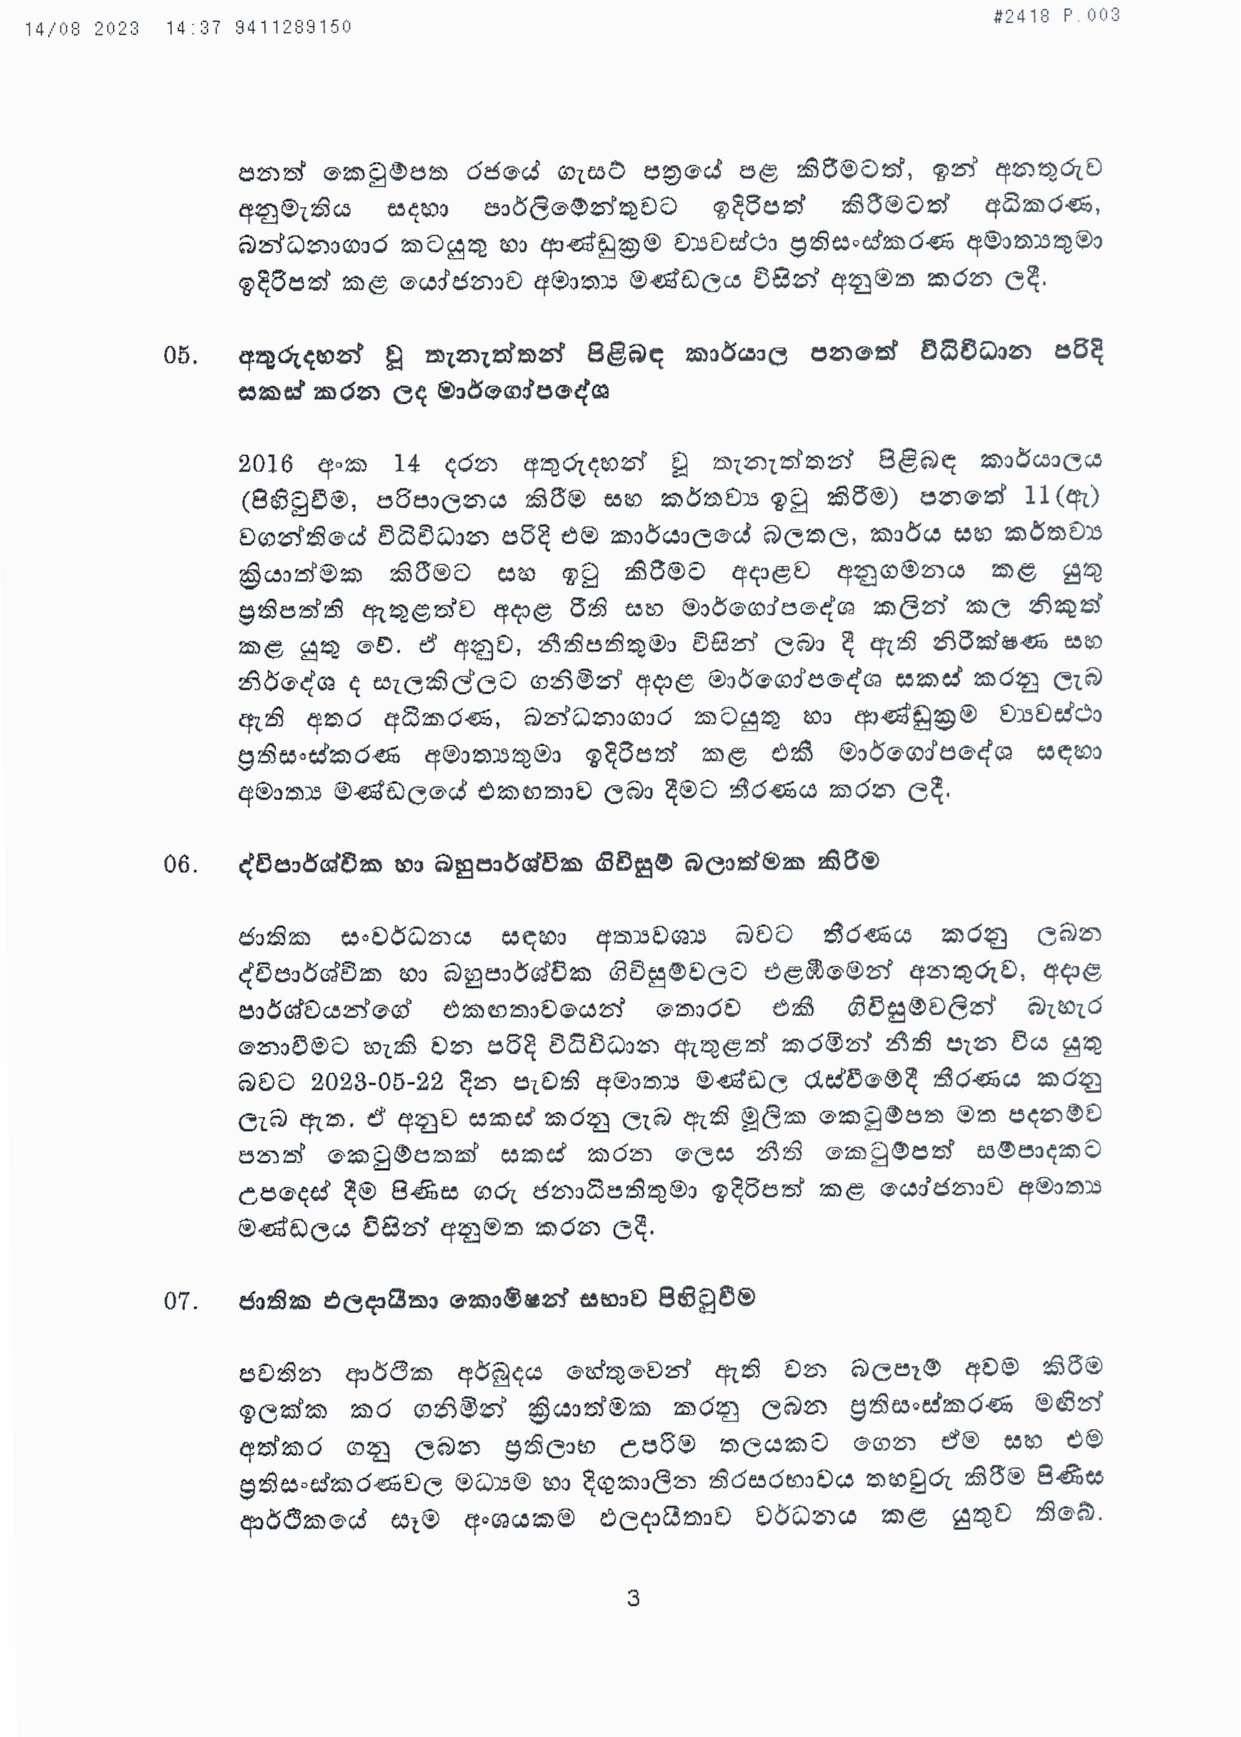 Cabinet Decision on 14.08.2023 page 003